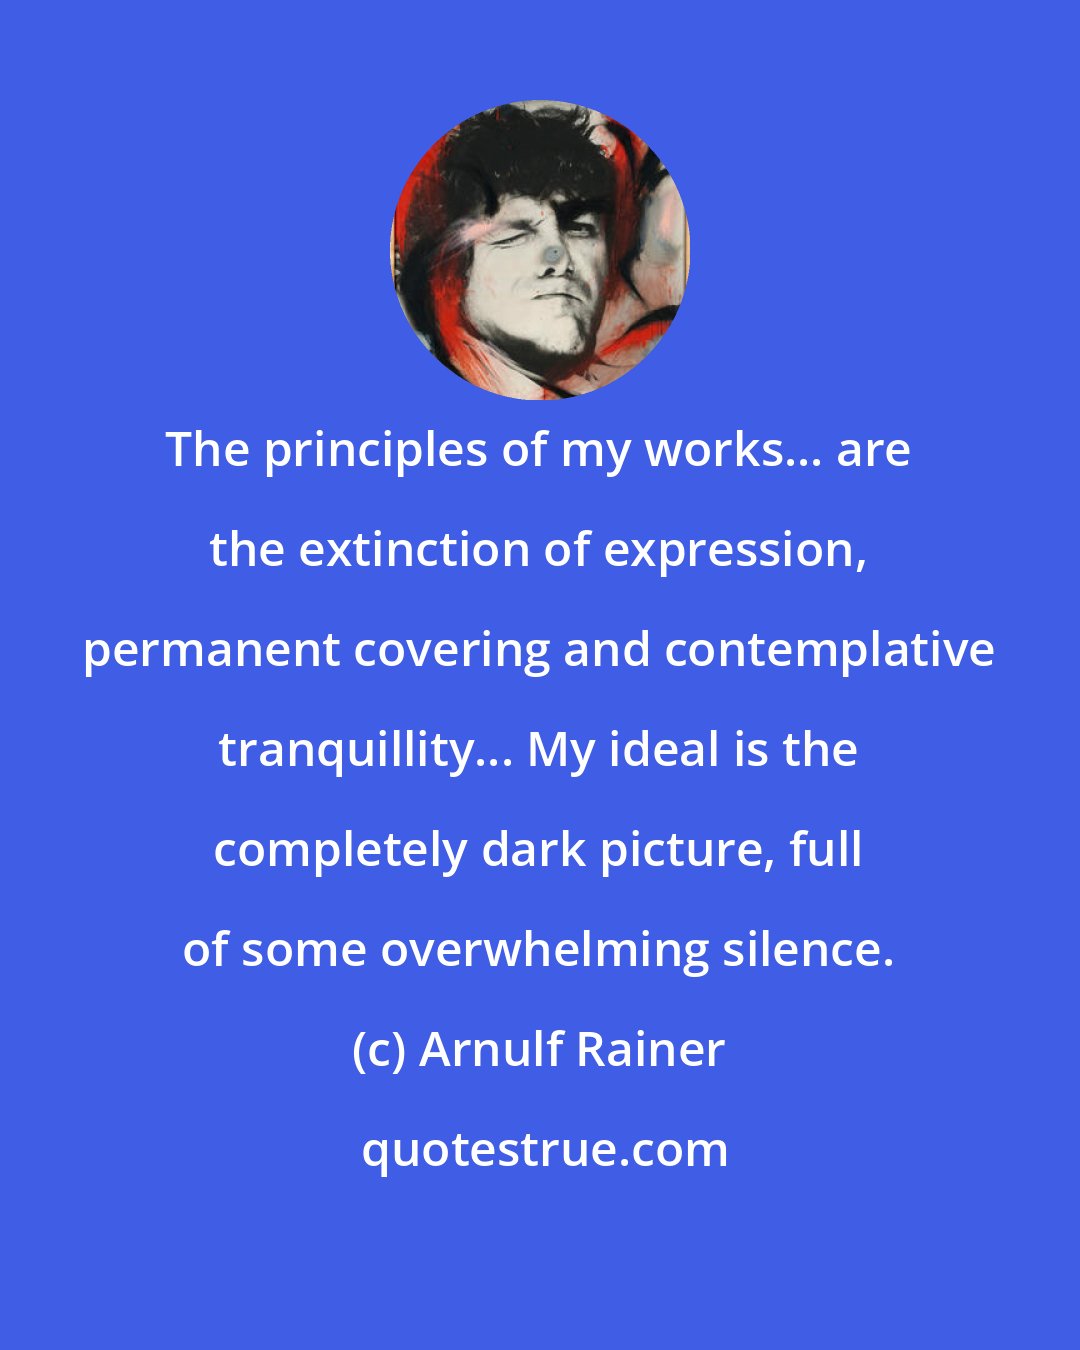 Arnulf Rainer: The principles of my works... are the extinction of expression, permanent covering and contemplative tranquillity... My ideal is the completely dark picture, full of some overwhelming silence.